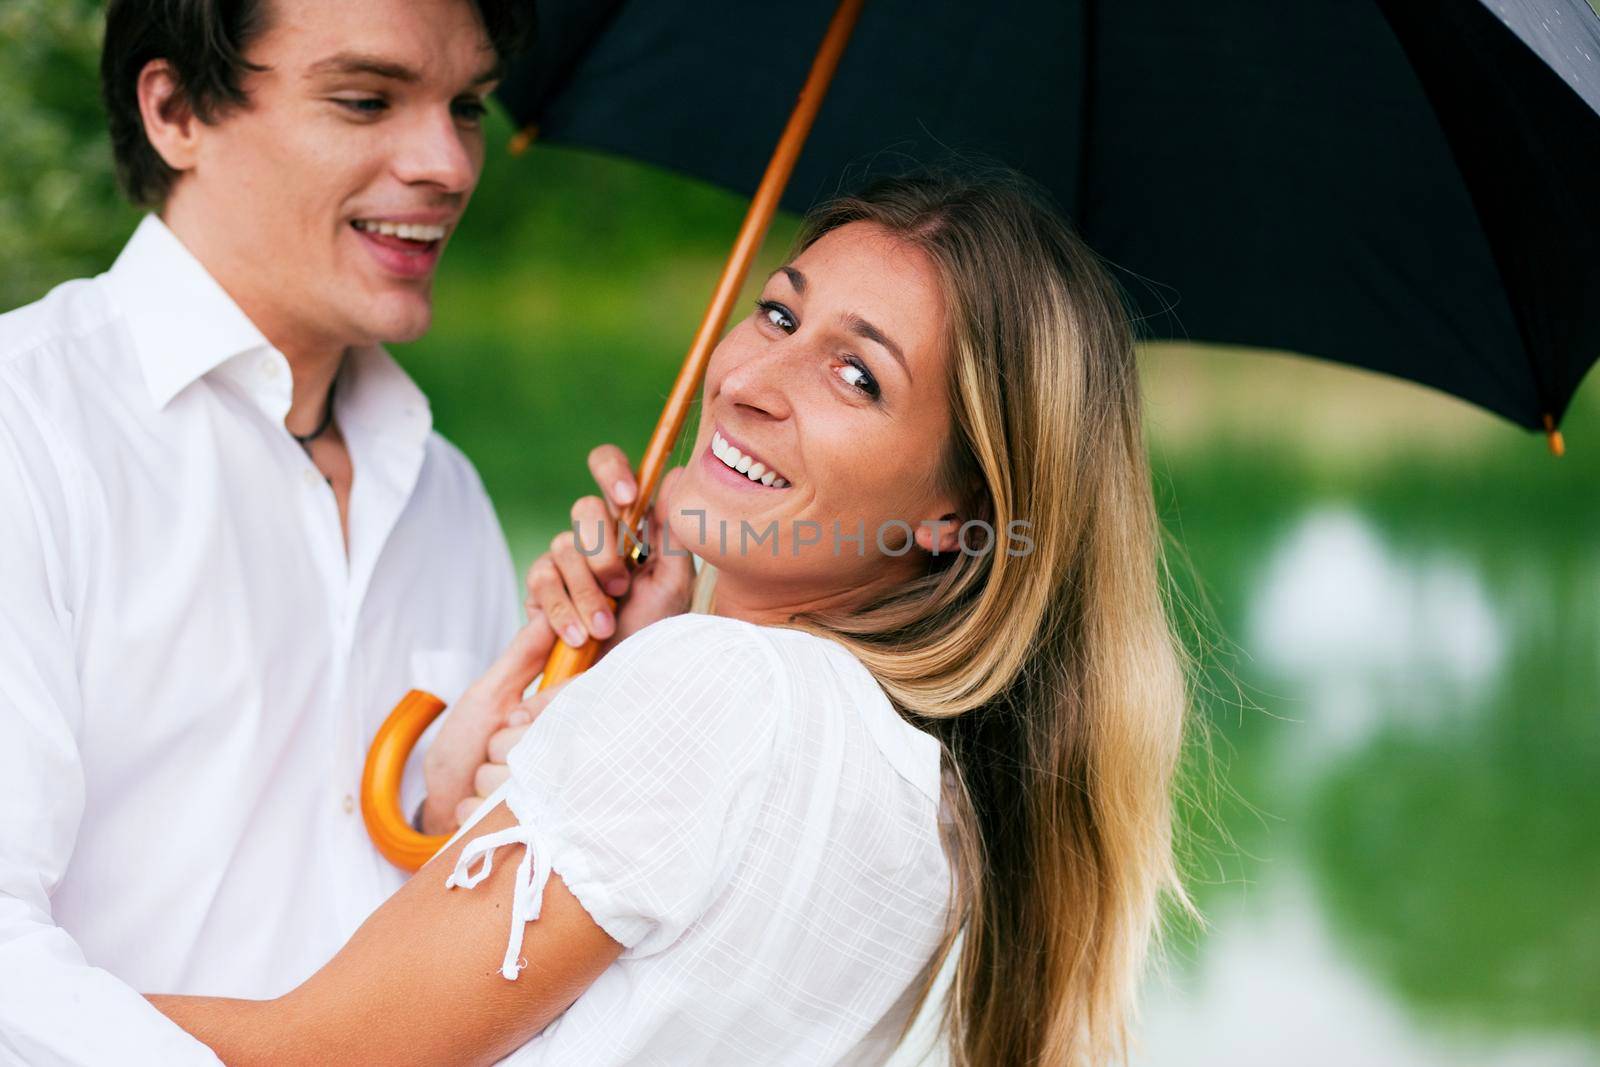 Couple (man and woman) at a lake in the summer rain with an umbrella, laughing and having fun despite of the bad weather